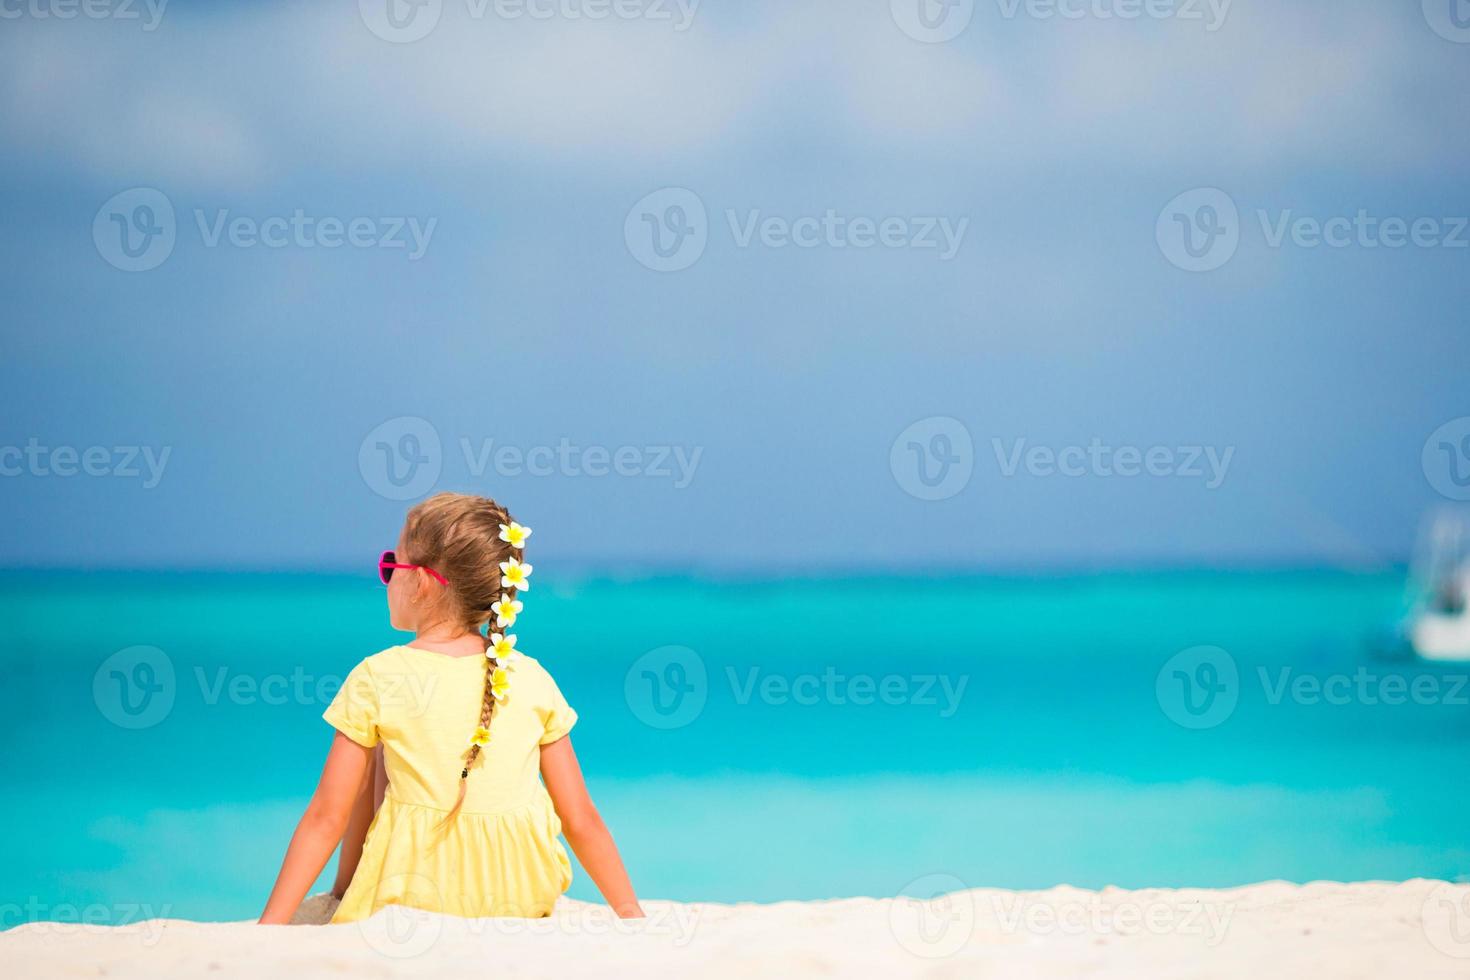 Adorable little girl with frangipani flowers in hairstyle on beach photo